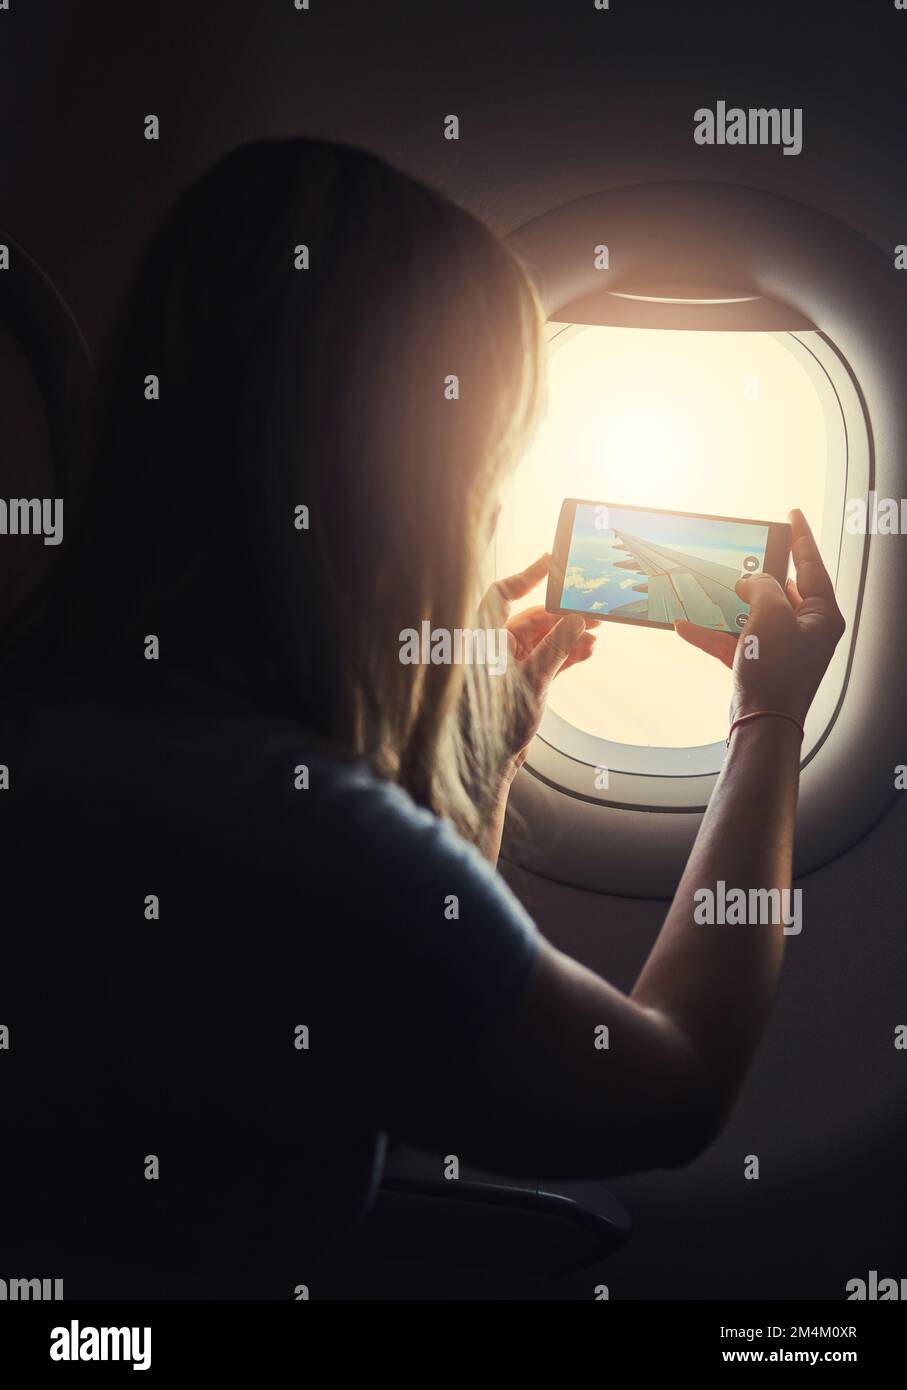 Too beautiful not to capture. a young person in an airplane. Stock Photo